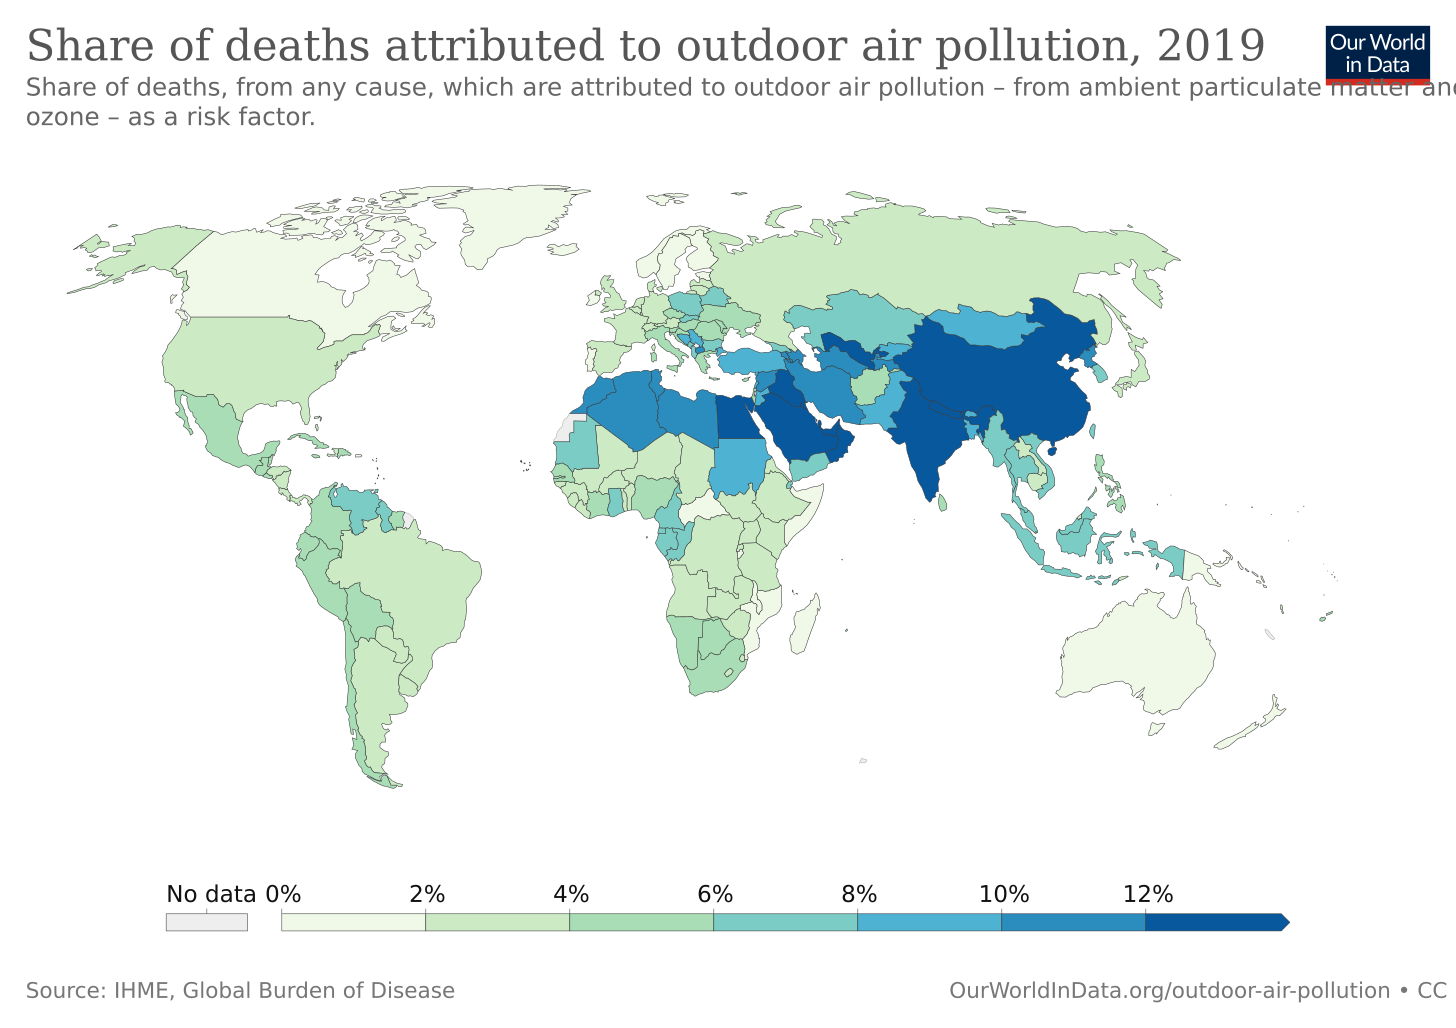 Outdoor Air Pollution - Our World in Data